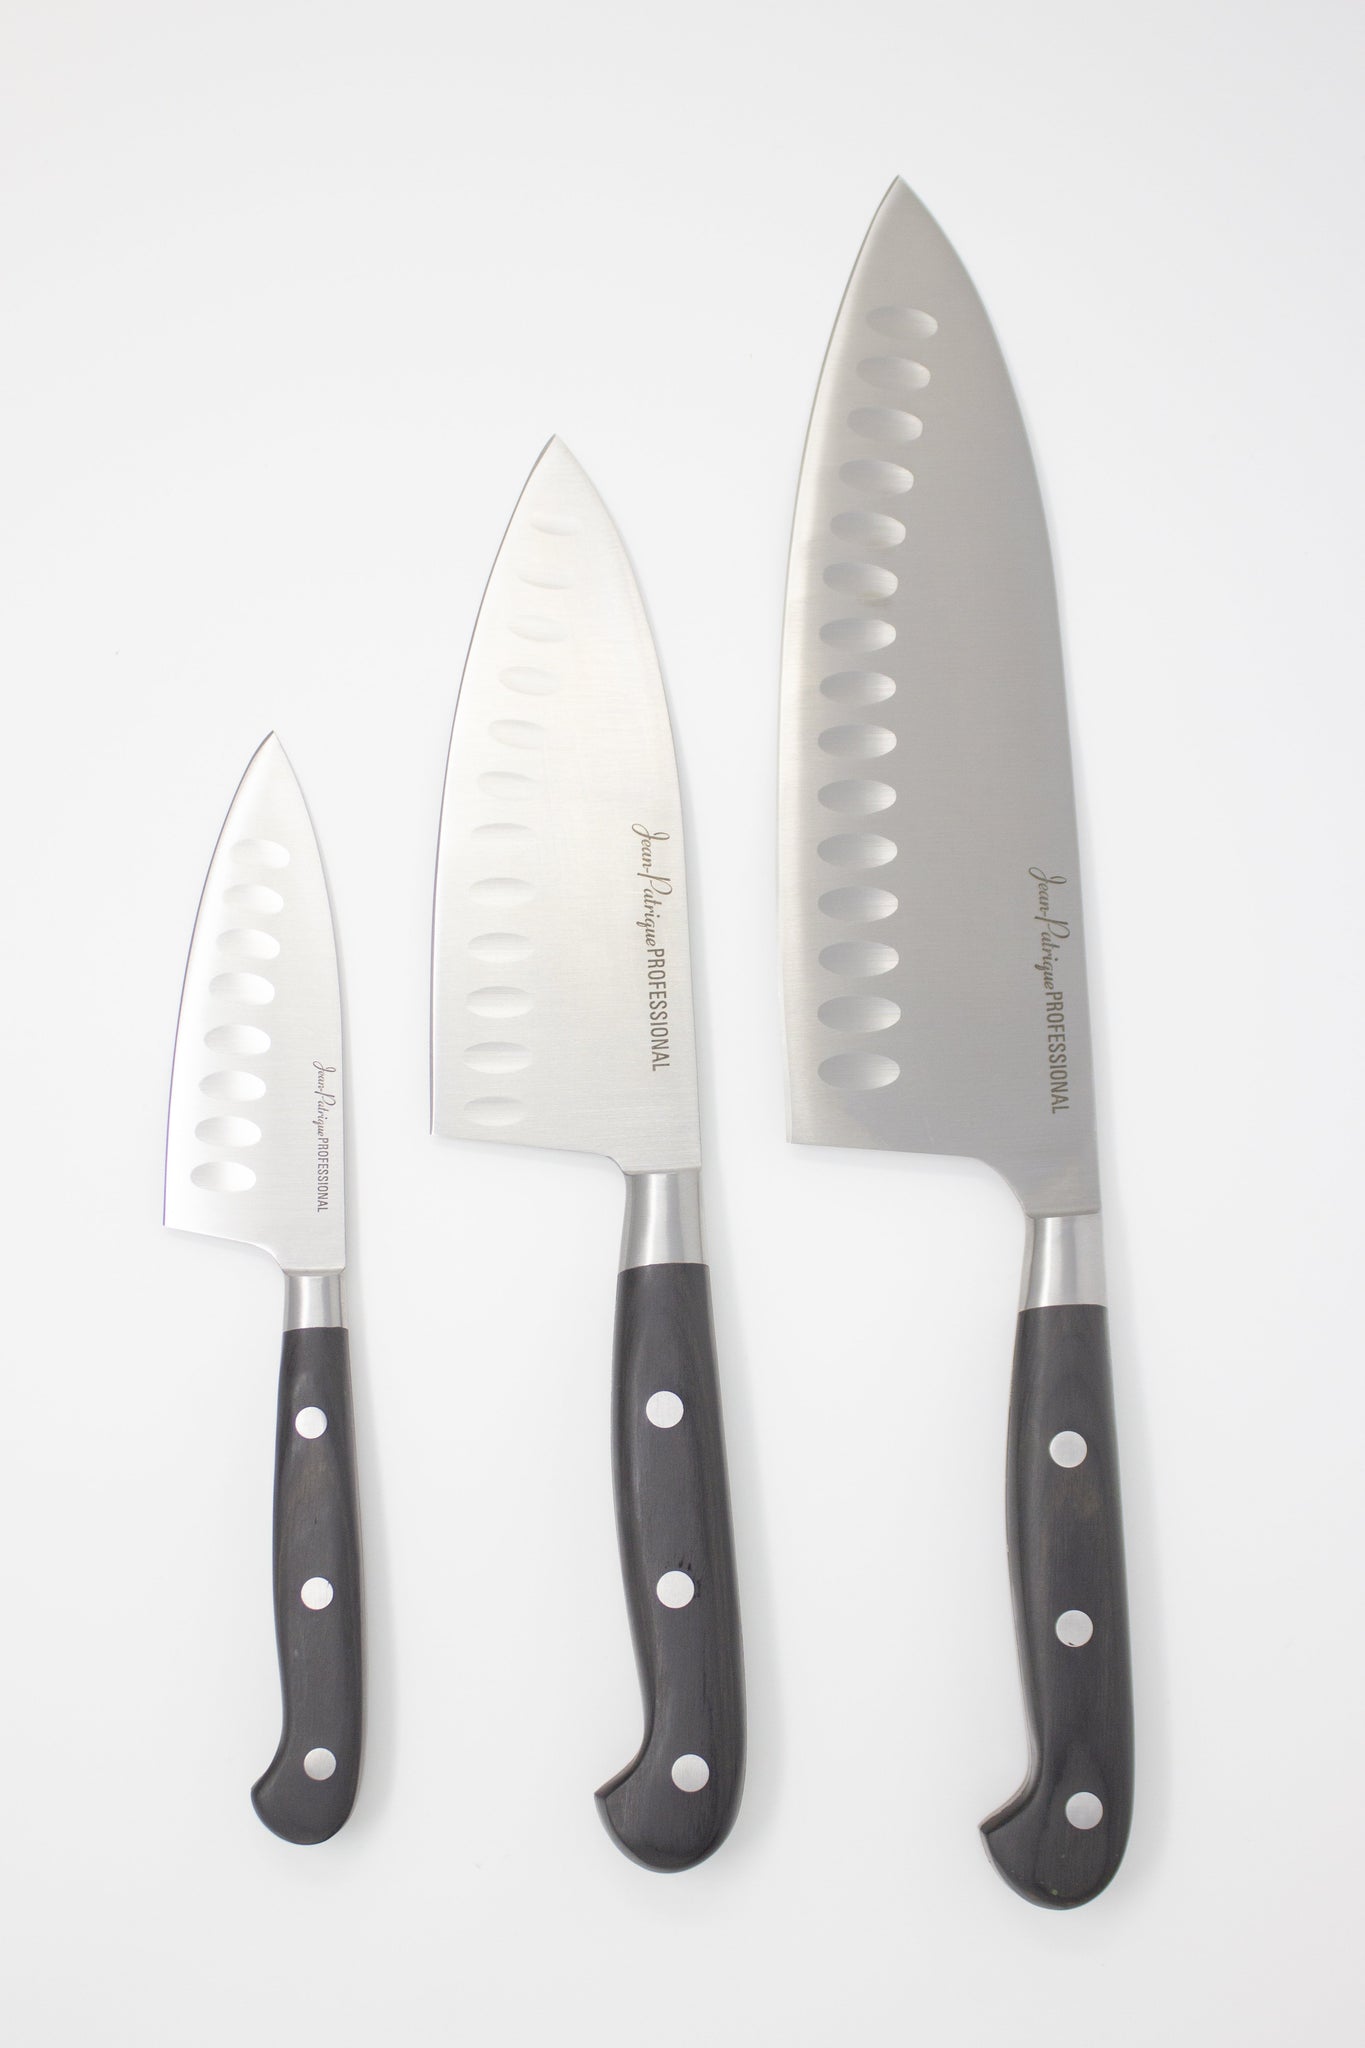 Chef’s Essential 3-Piece Stainless Steel Knife Set